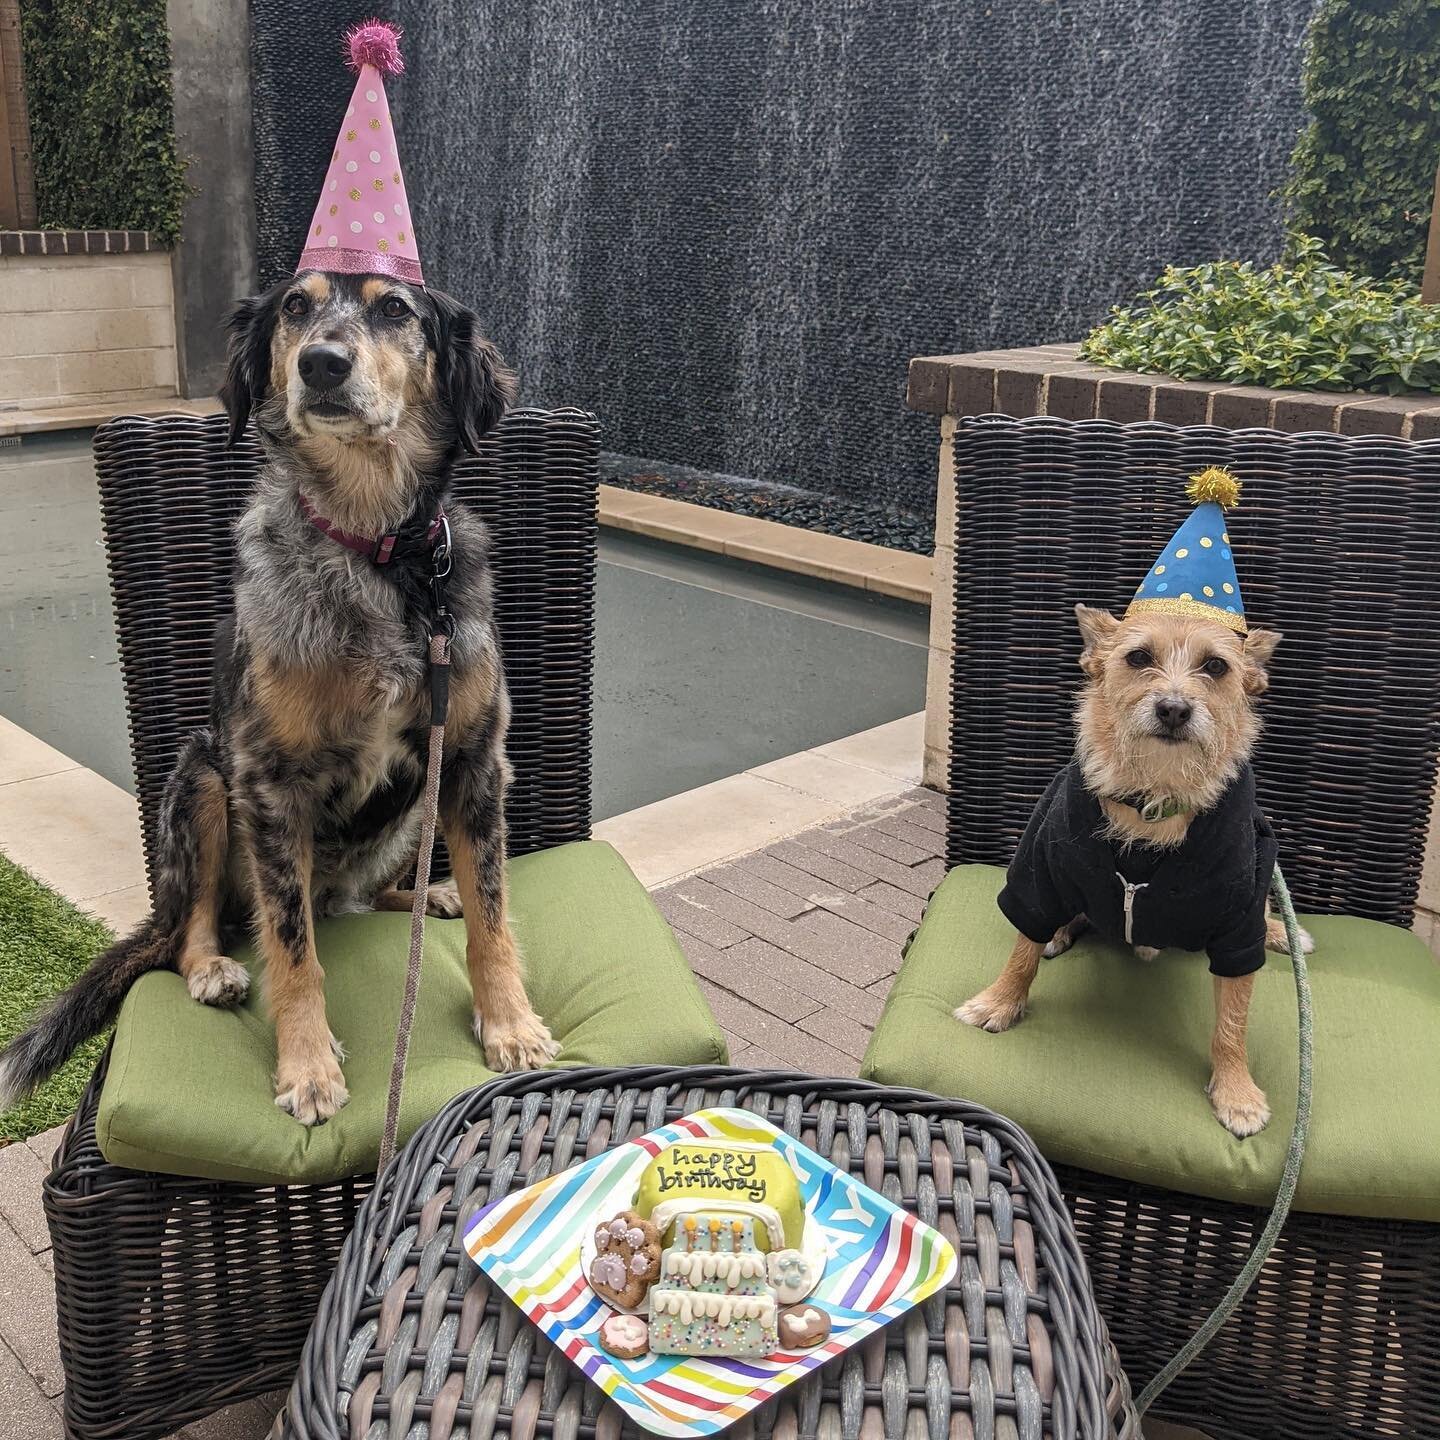 We just want to wish a Happy Birthday to Mica 🐶, our Barketing Manager, &amp; Zeppelin 🦊, Head of Puplick Relations! 🥳🐾😂
.
By coincidence, our awesome rescues&rsquo; birthdays are only a few days apart so we love throwing them a double celebrati